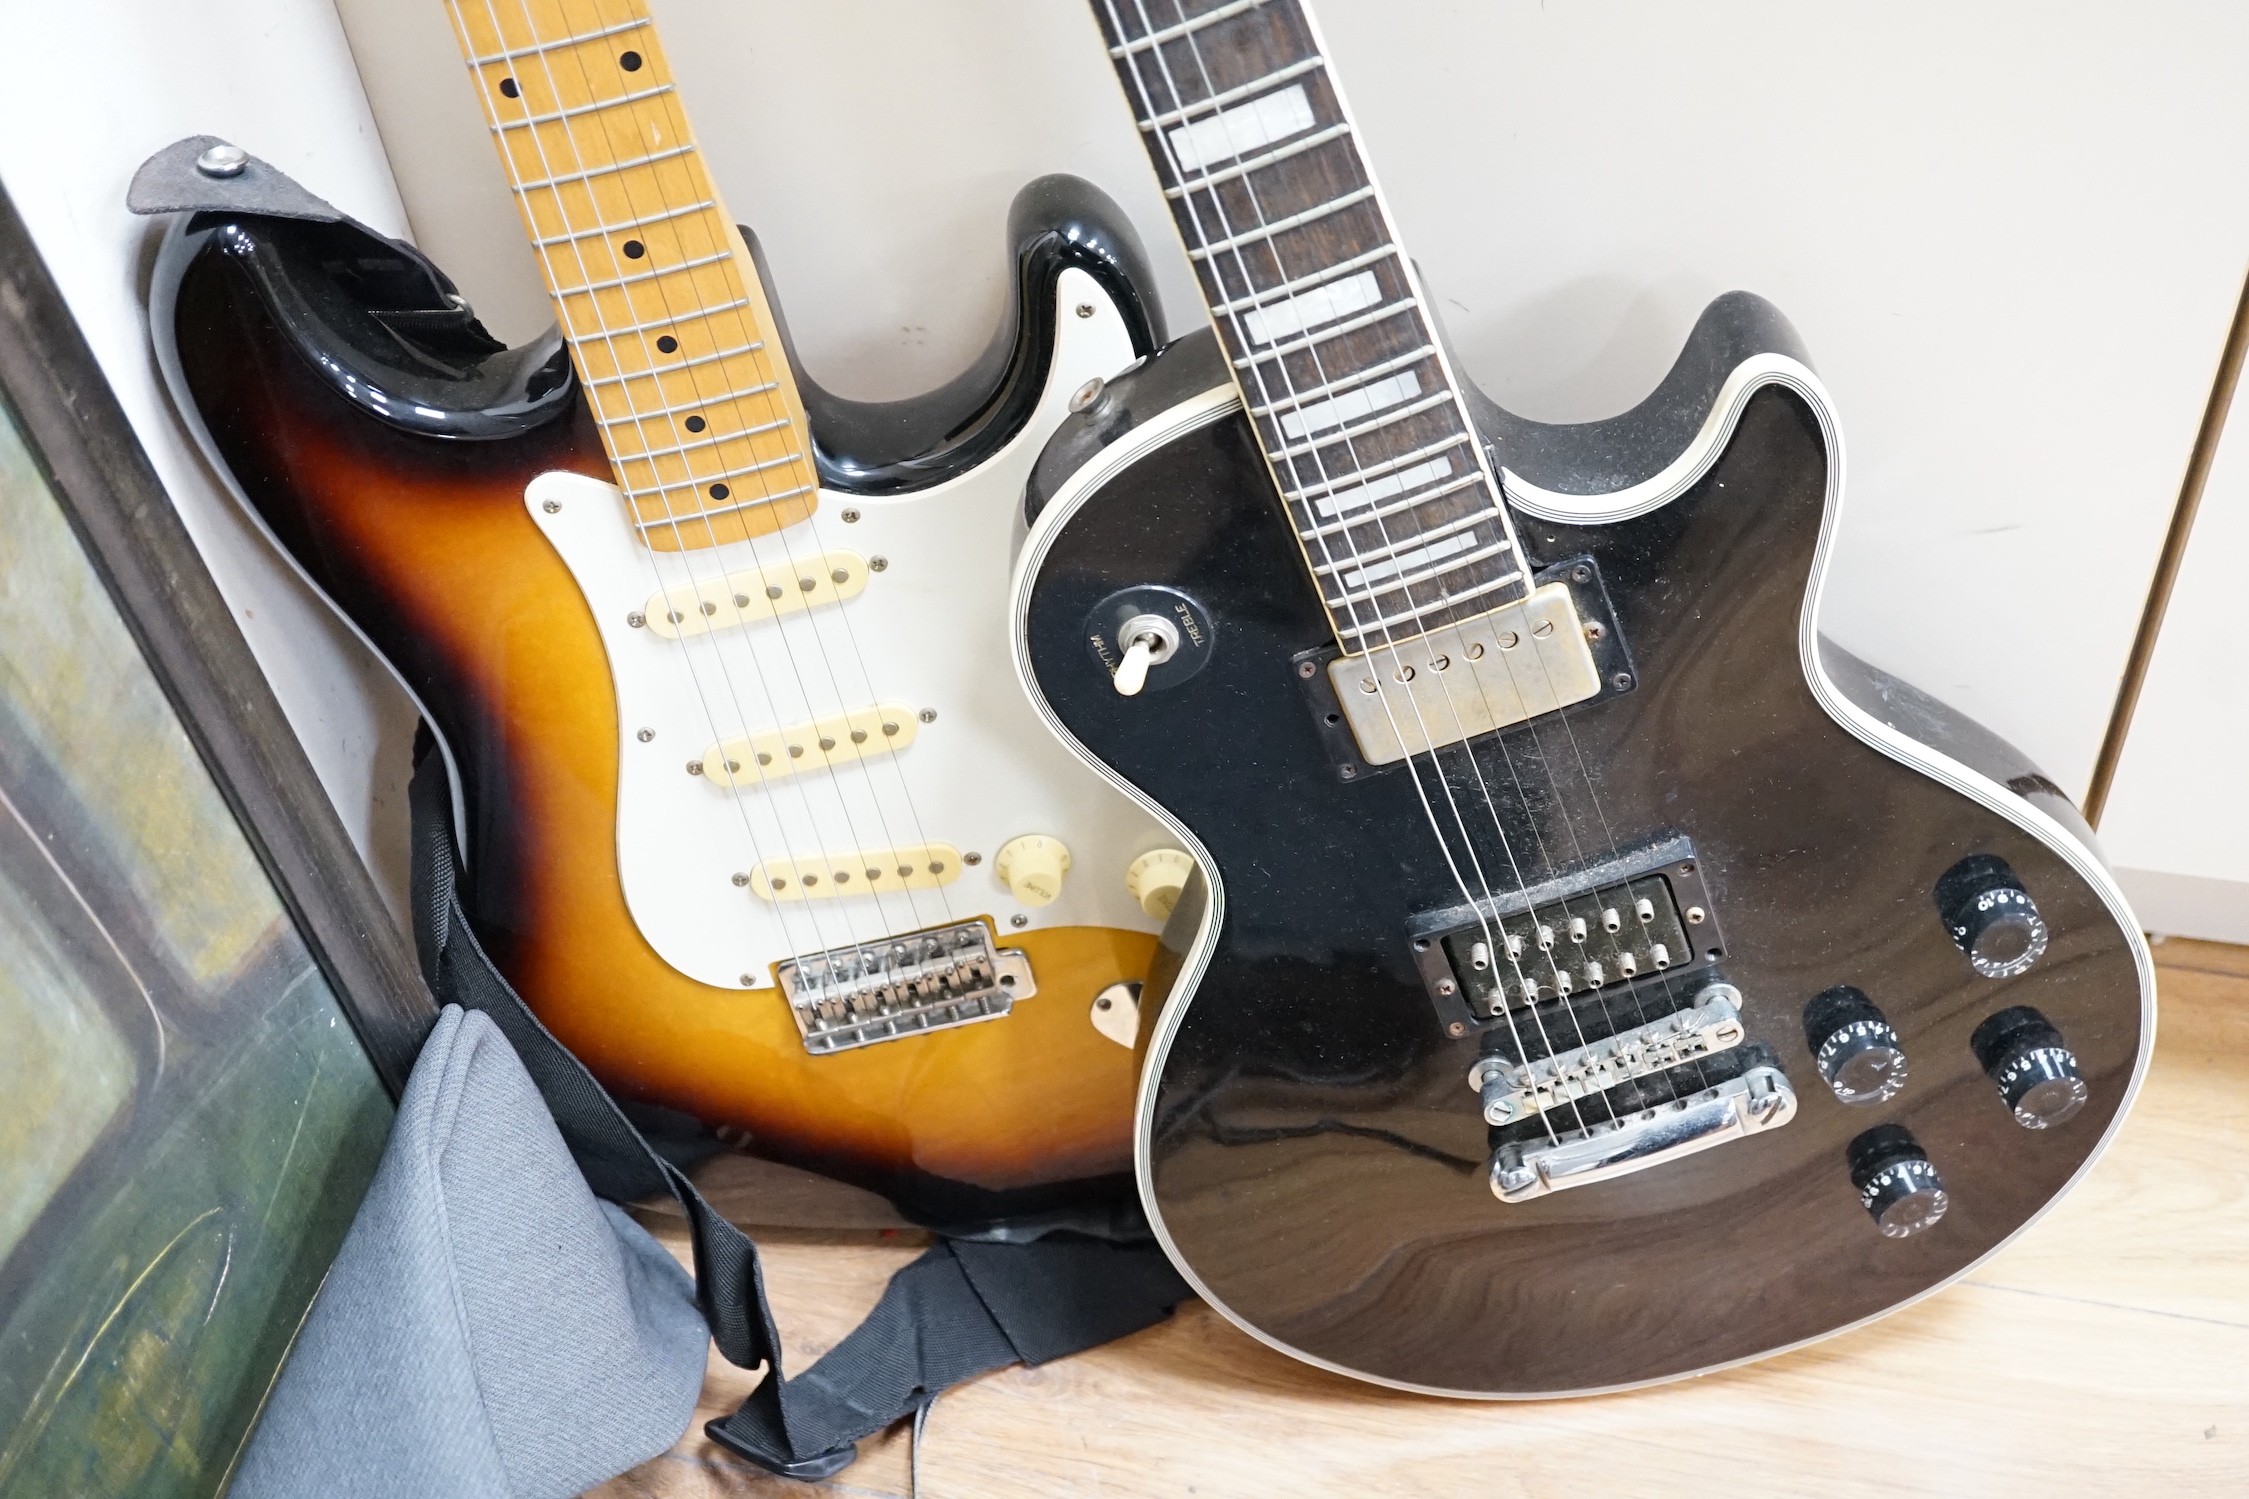 Two electric guitars: a Kay and a Vester Stage series, one soft case